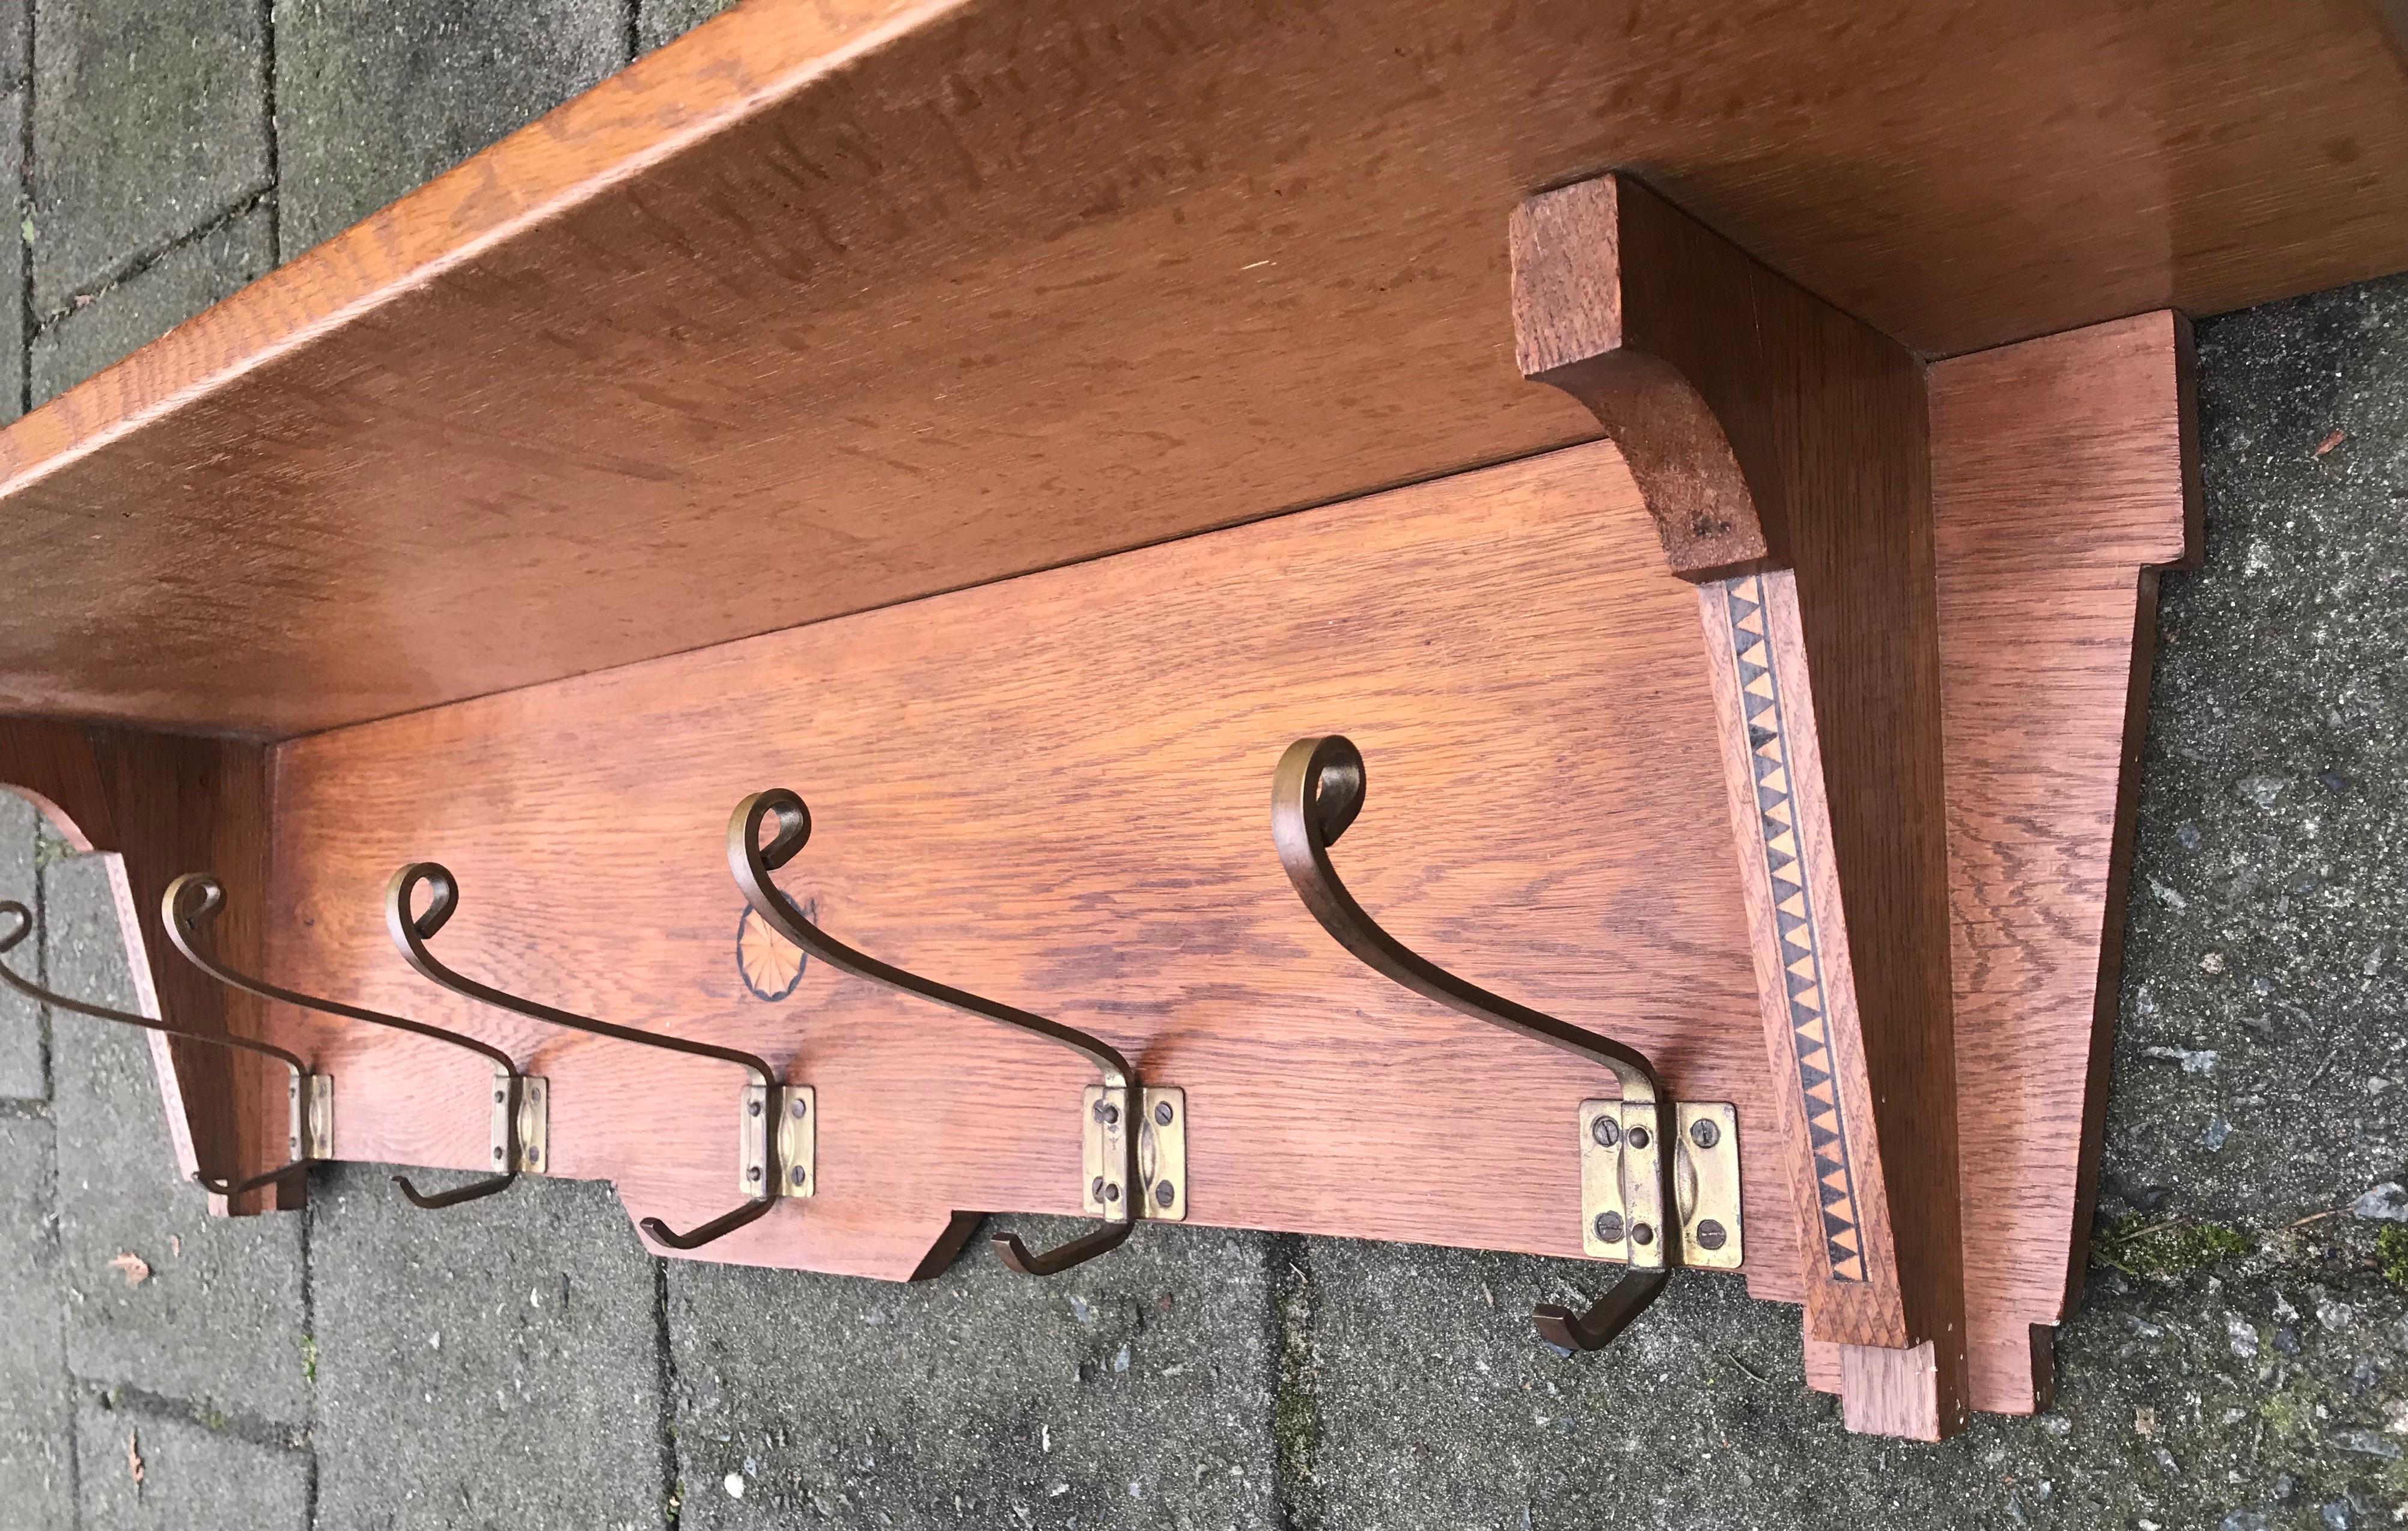 Practical size and light color antique coat rack.

If you are looking for a fine quality Arts & Crafts era coat rack then this handmade and great condition specimen for wall mounting could be perfect for your interior. The light color oak and sleek